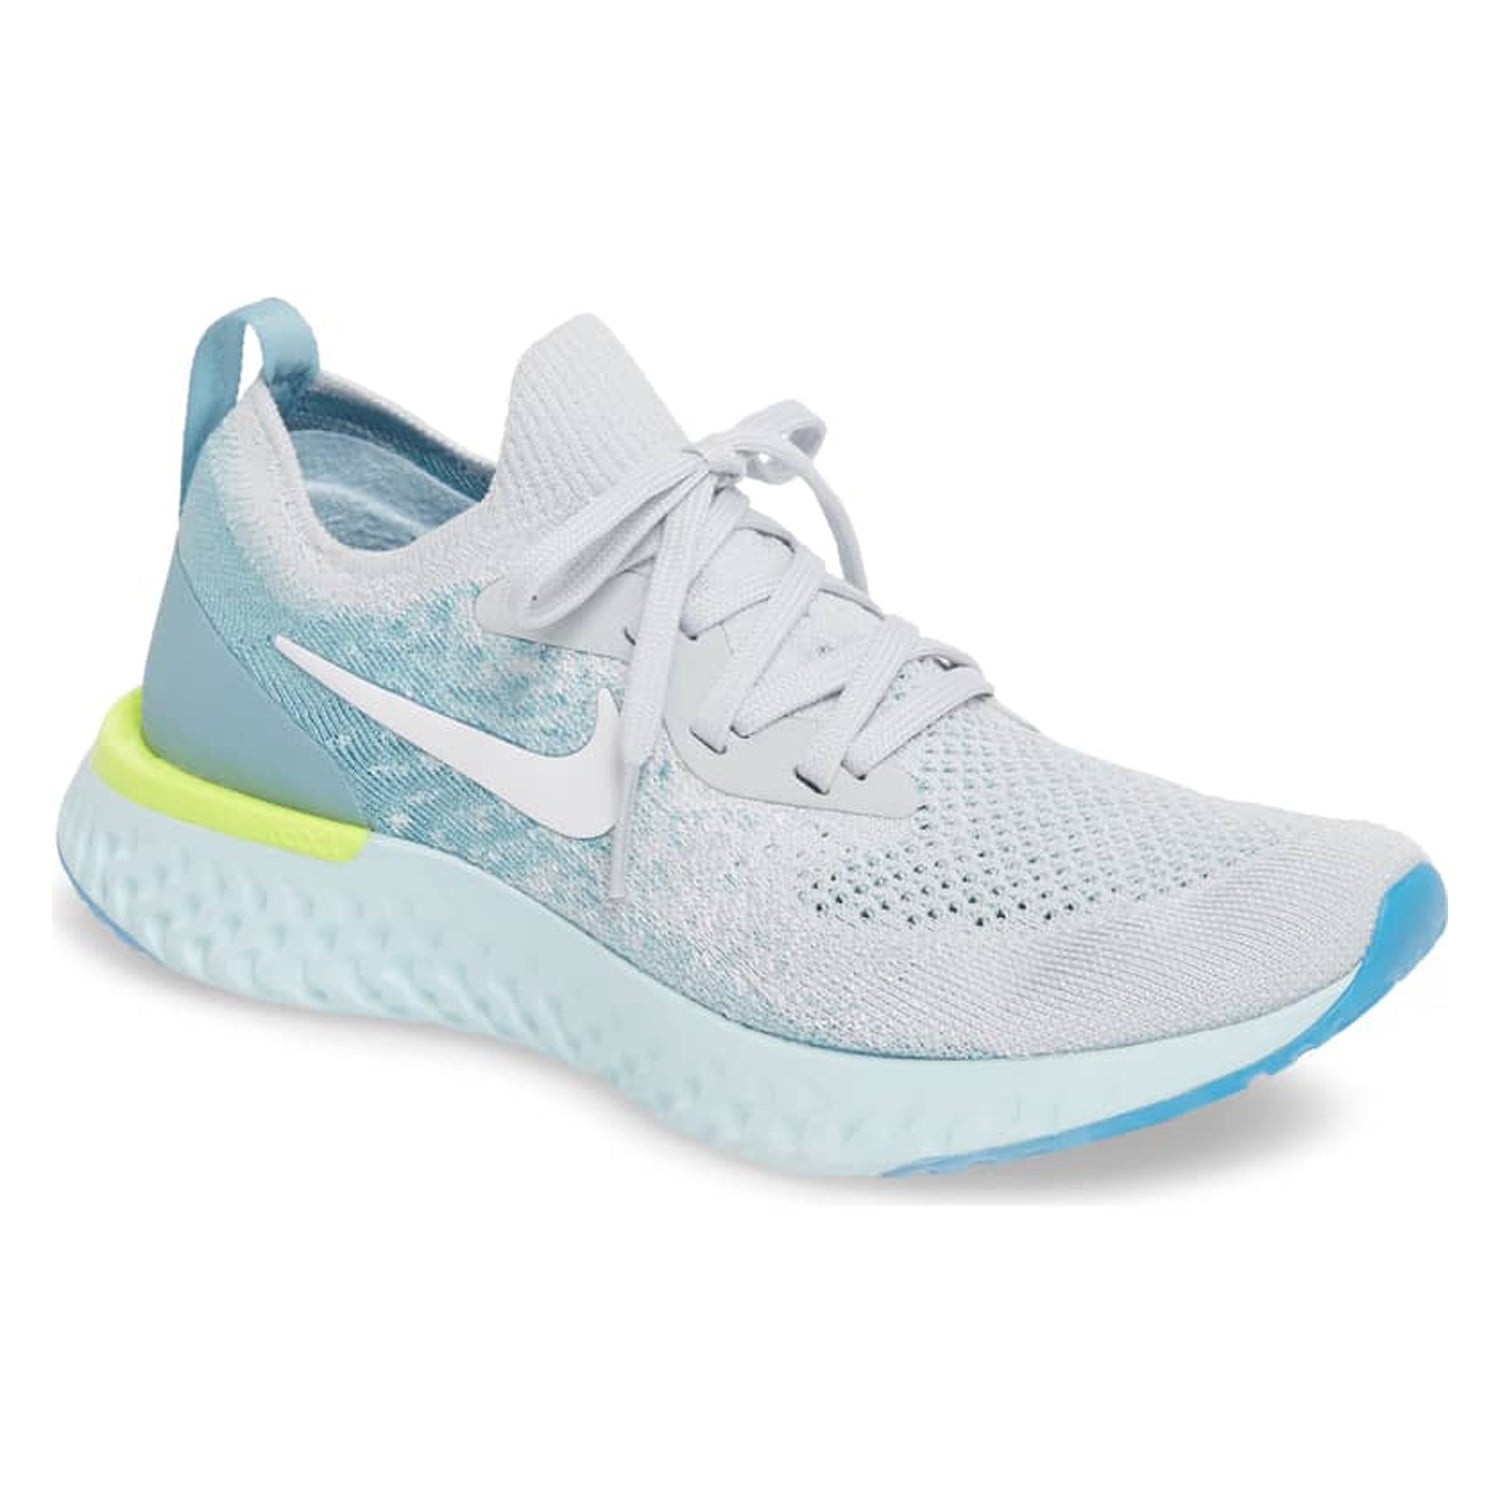 Nike Epic React Flyknit Running Shoes Review |